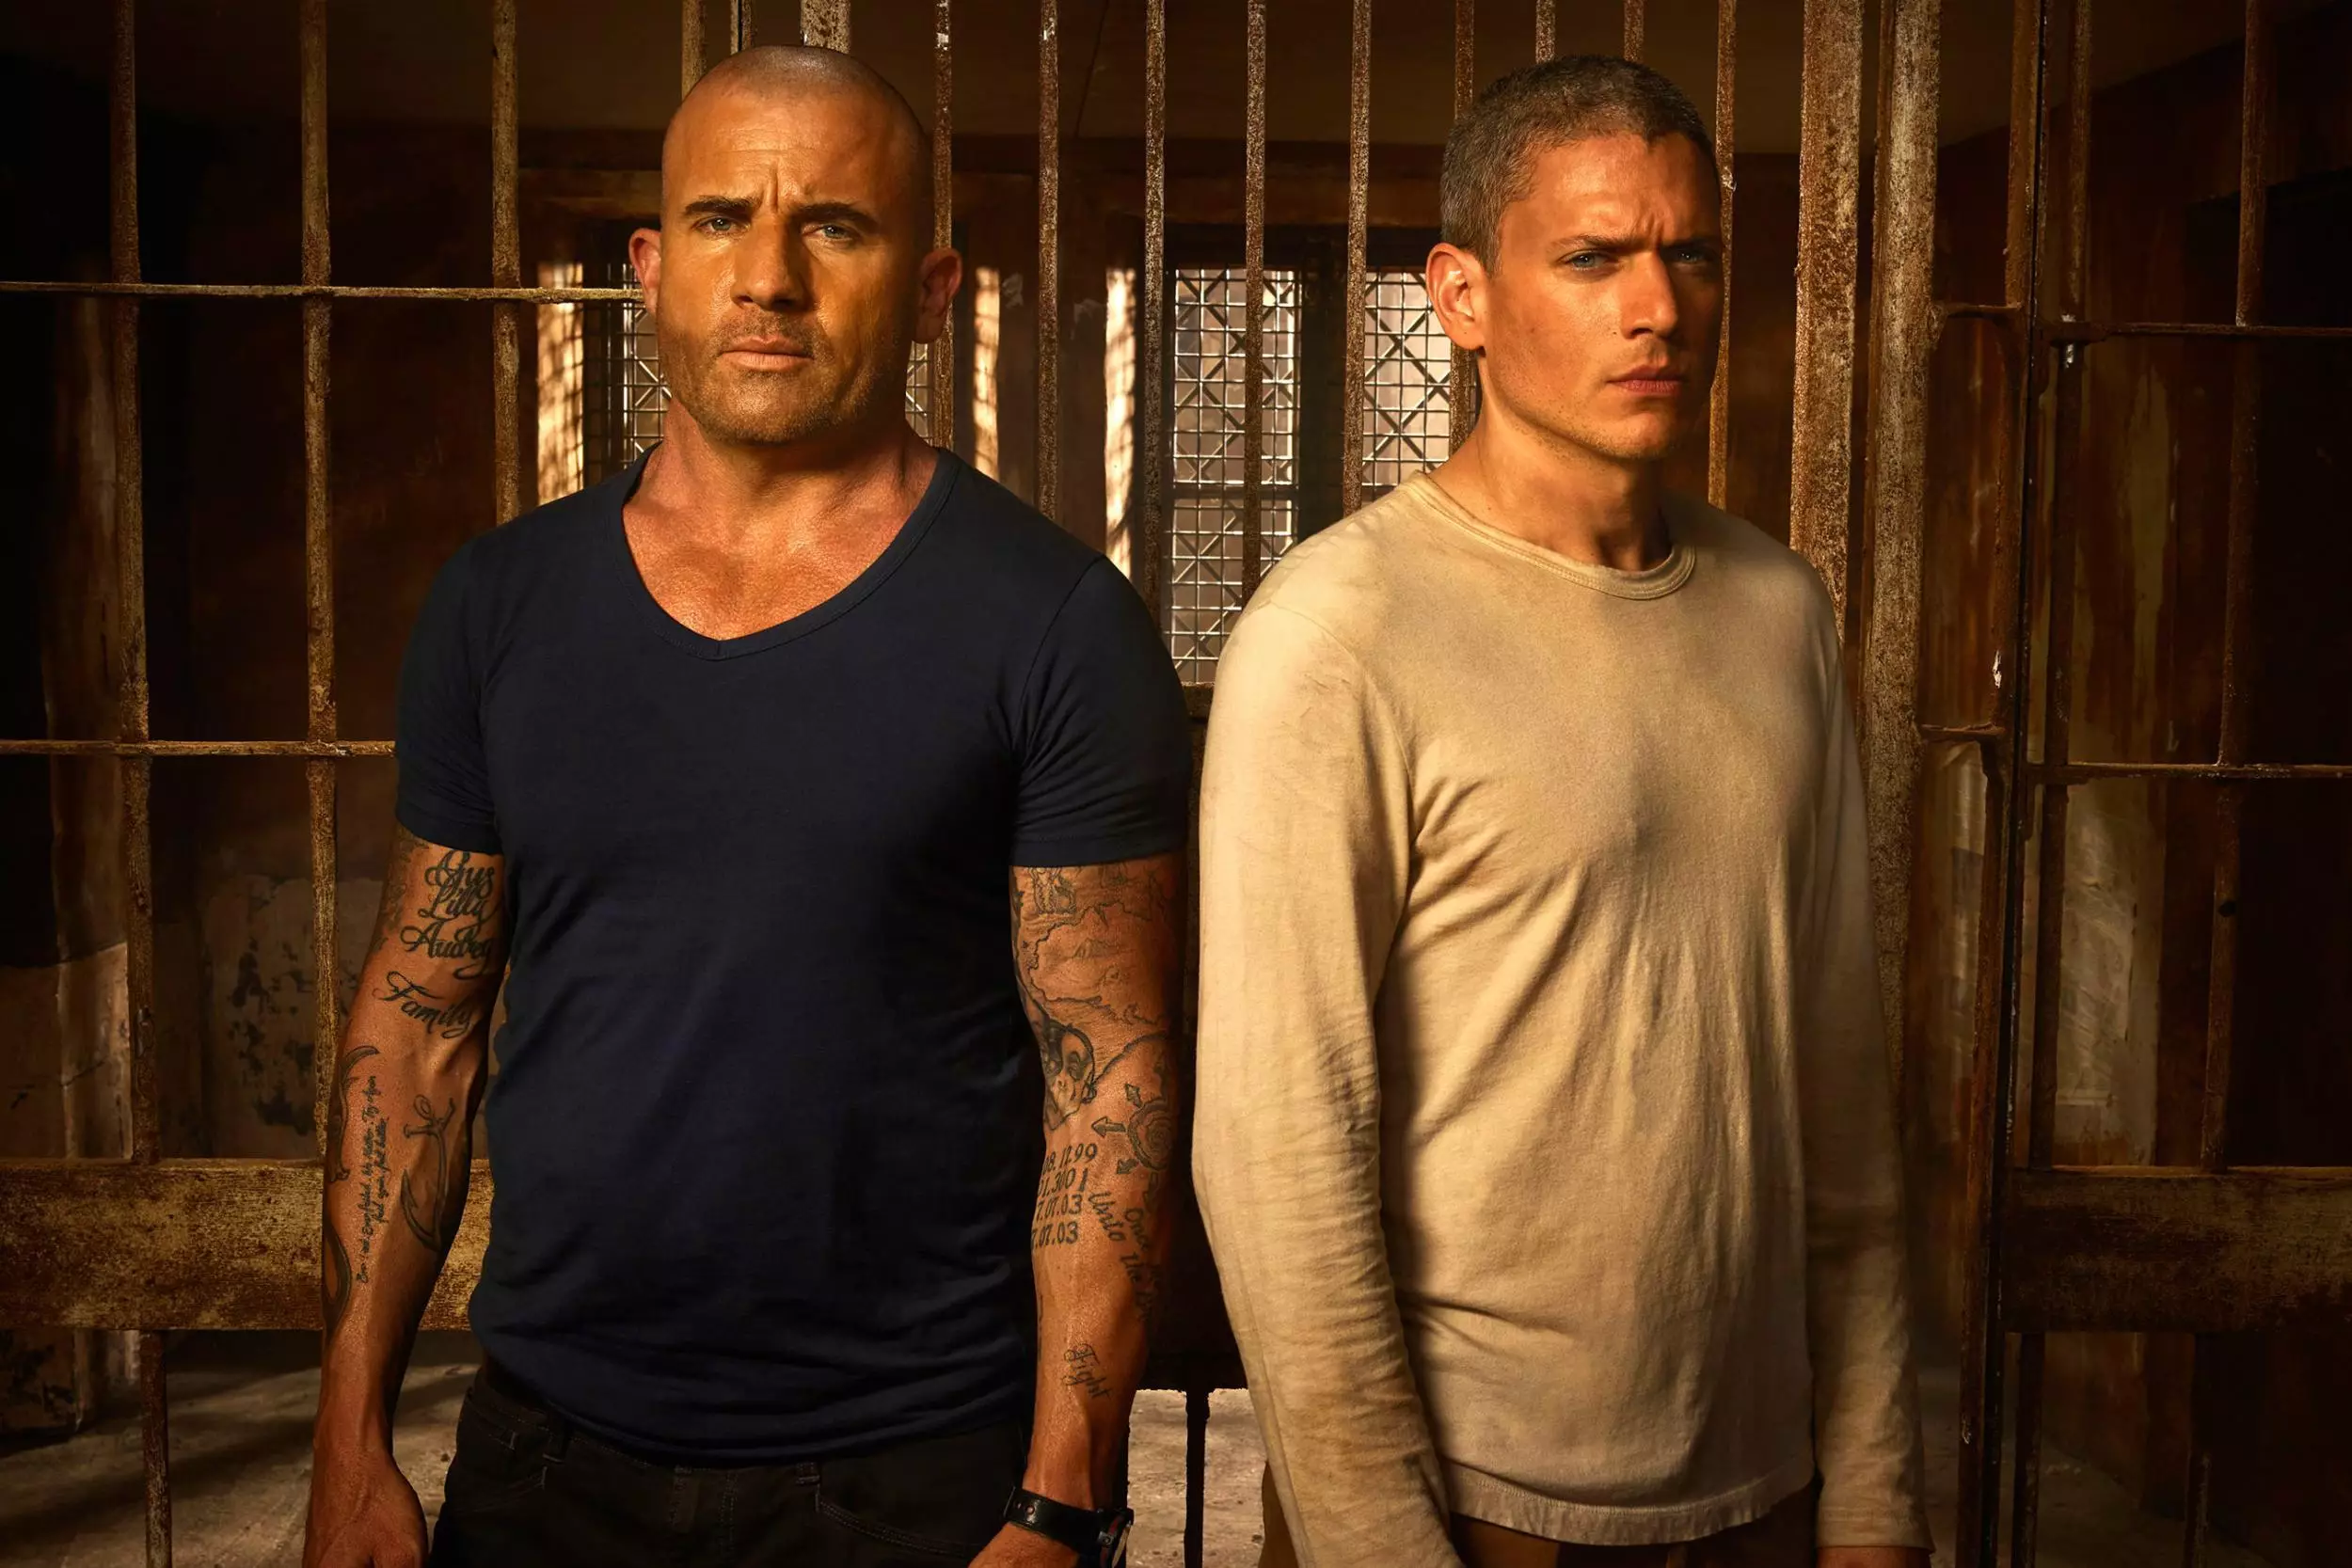 Dominic Purcell on the left.